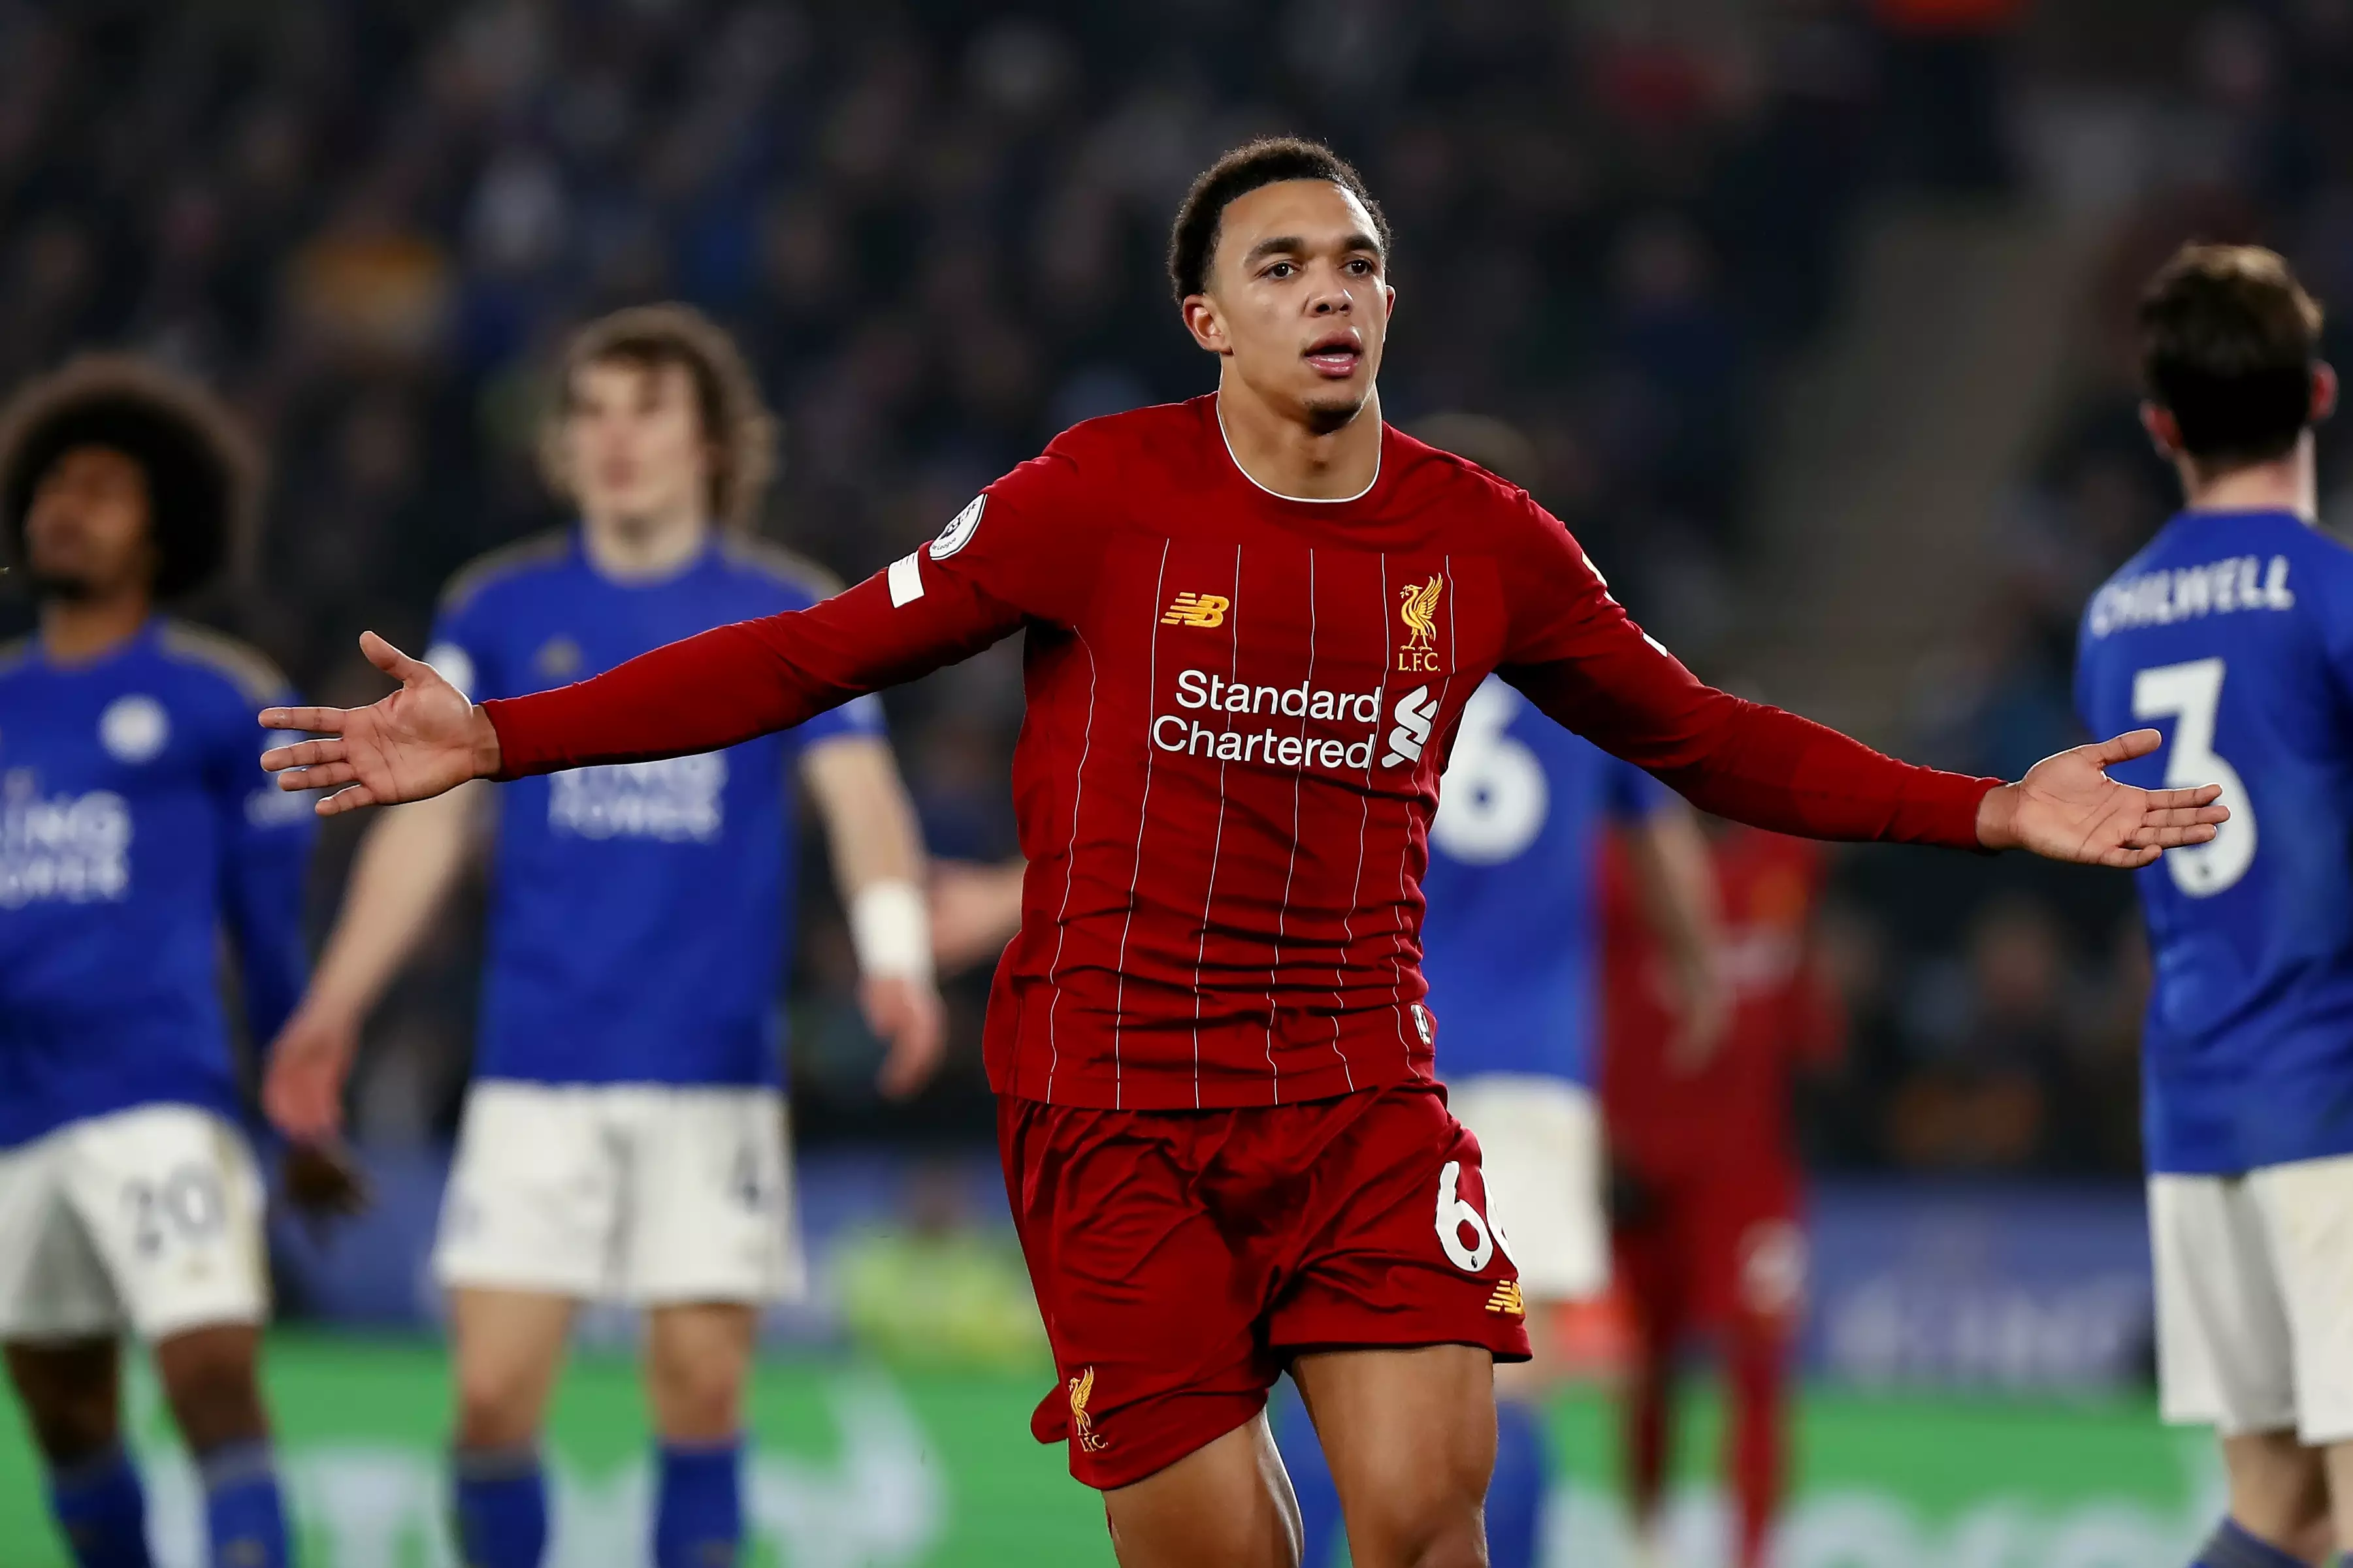 Trent Alexander-Arnold has also been in excellent form this season. Image: PA Images